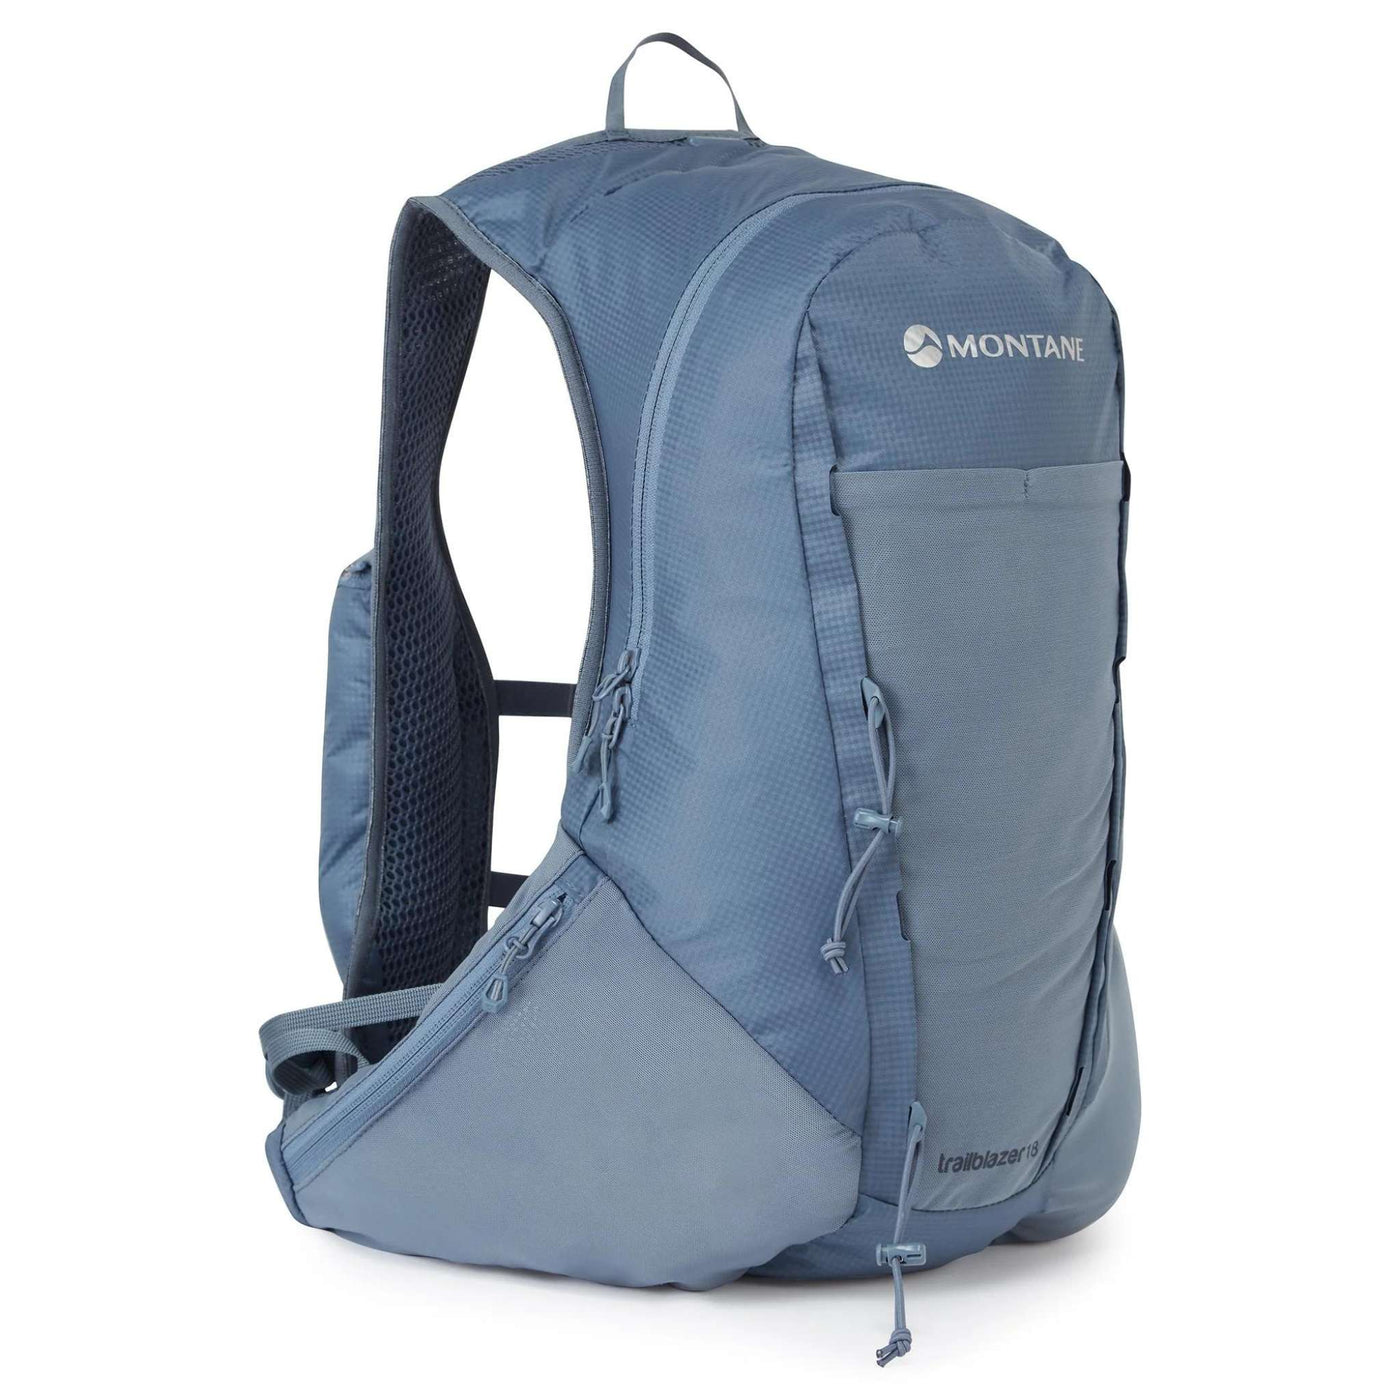 Montane Trailblazer 18 | Trail Running and Fast Packing Pack | Further Faster Christchurch NZ | #stone-blue